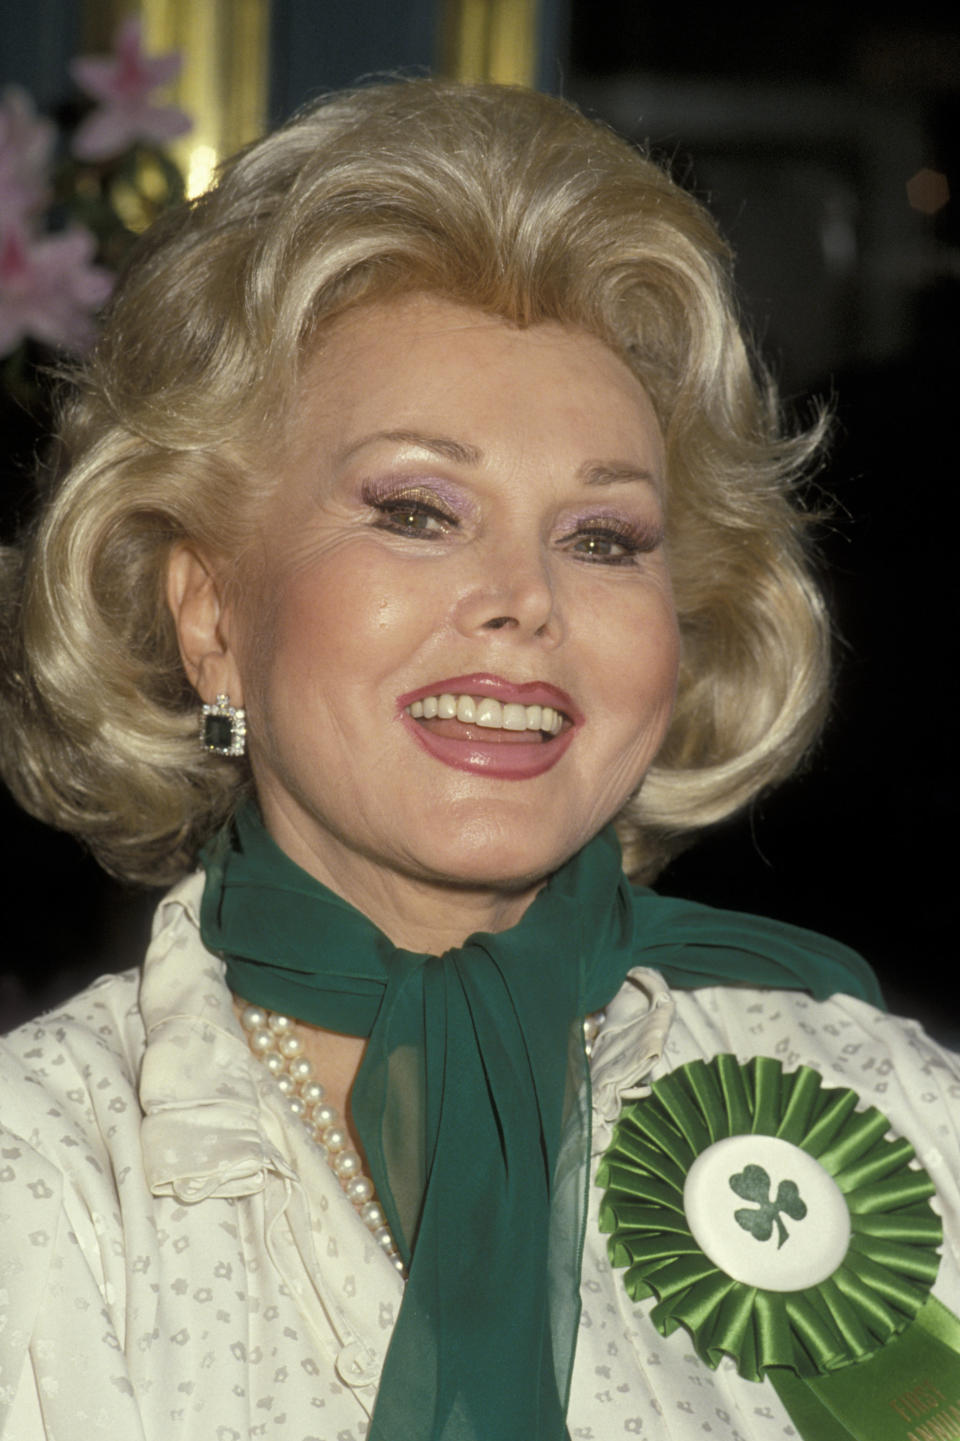 Gabor photographed in 1985. This quote was included in <a href="http://time.com/4605880/zsa-zsa-gabor-dies-obituary/" target="_blank">Time magazine's obituary</a>.&nbsp;